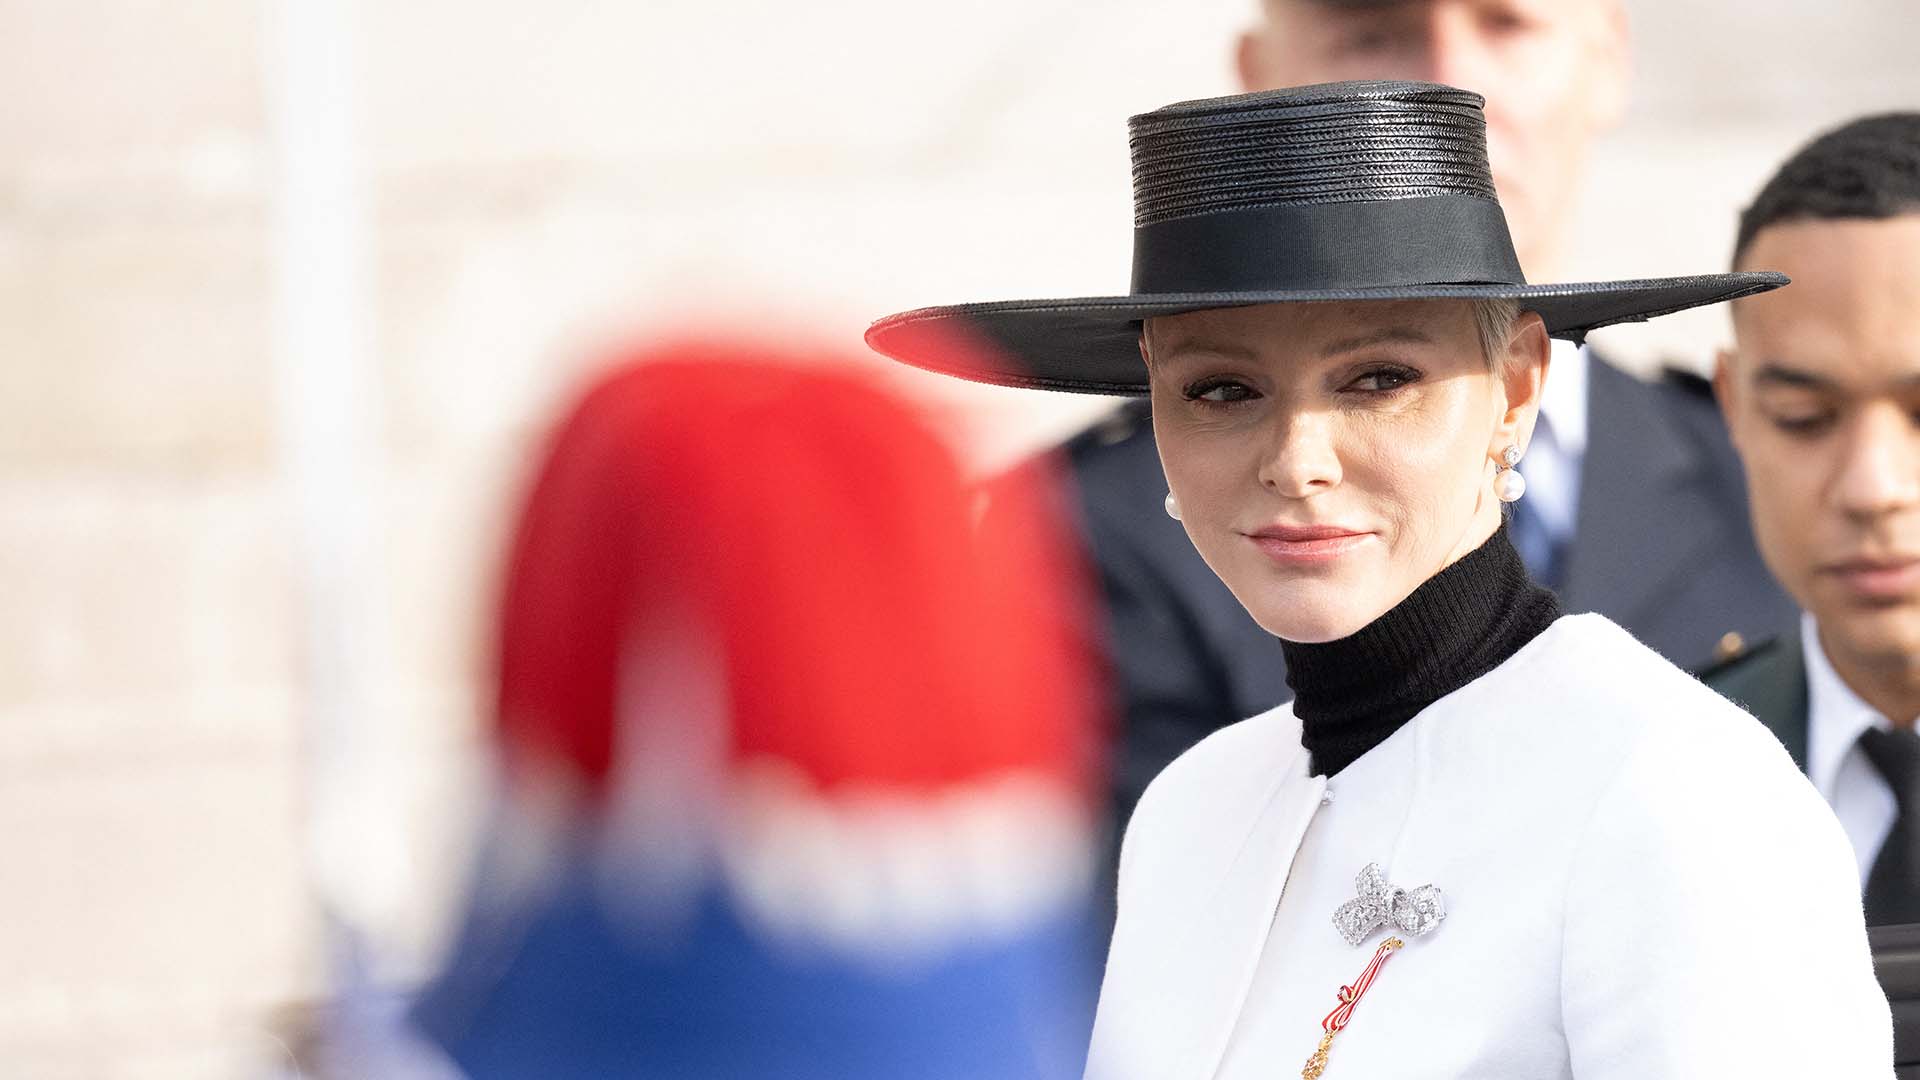 Princess Charlene of Monaco arrives at the Saint Nicholas Cathedral during the Monaco National Day Celebrations in Monaco, on November 19, 2022 in Monaco, France. Photo by David Niviere/ABACAPRESS.COM